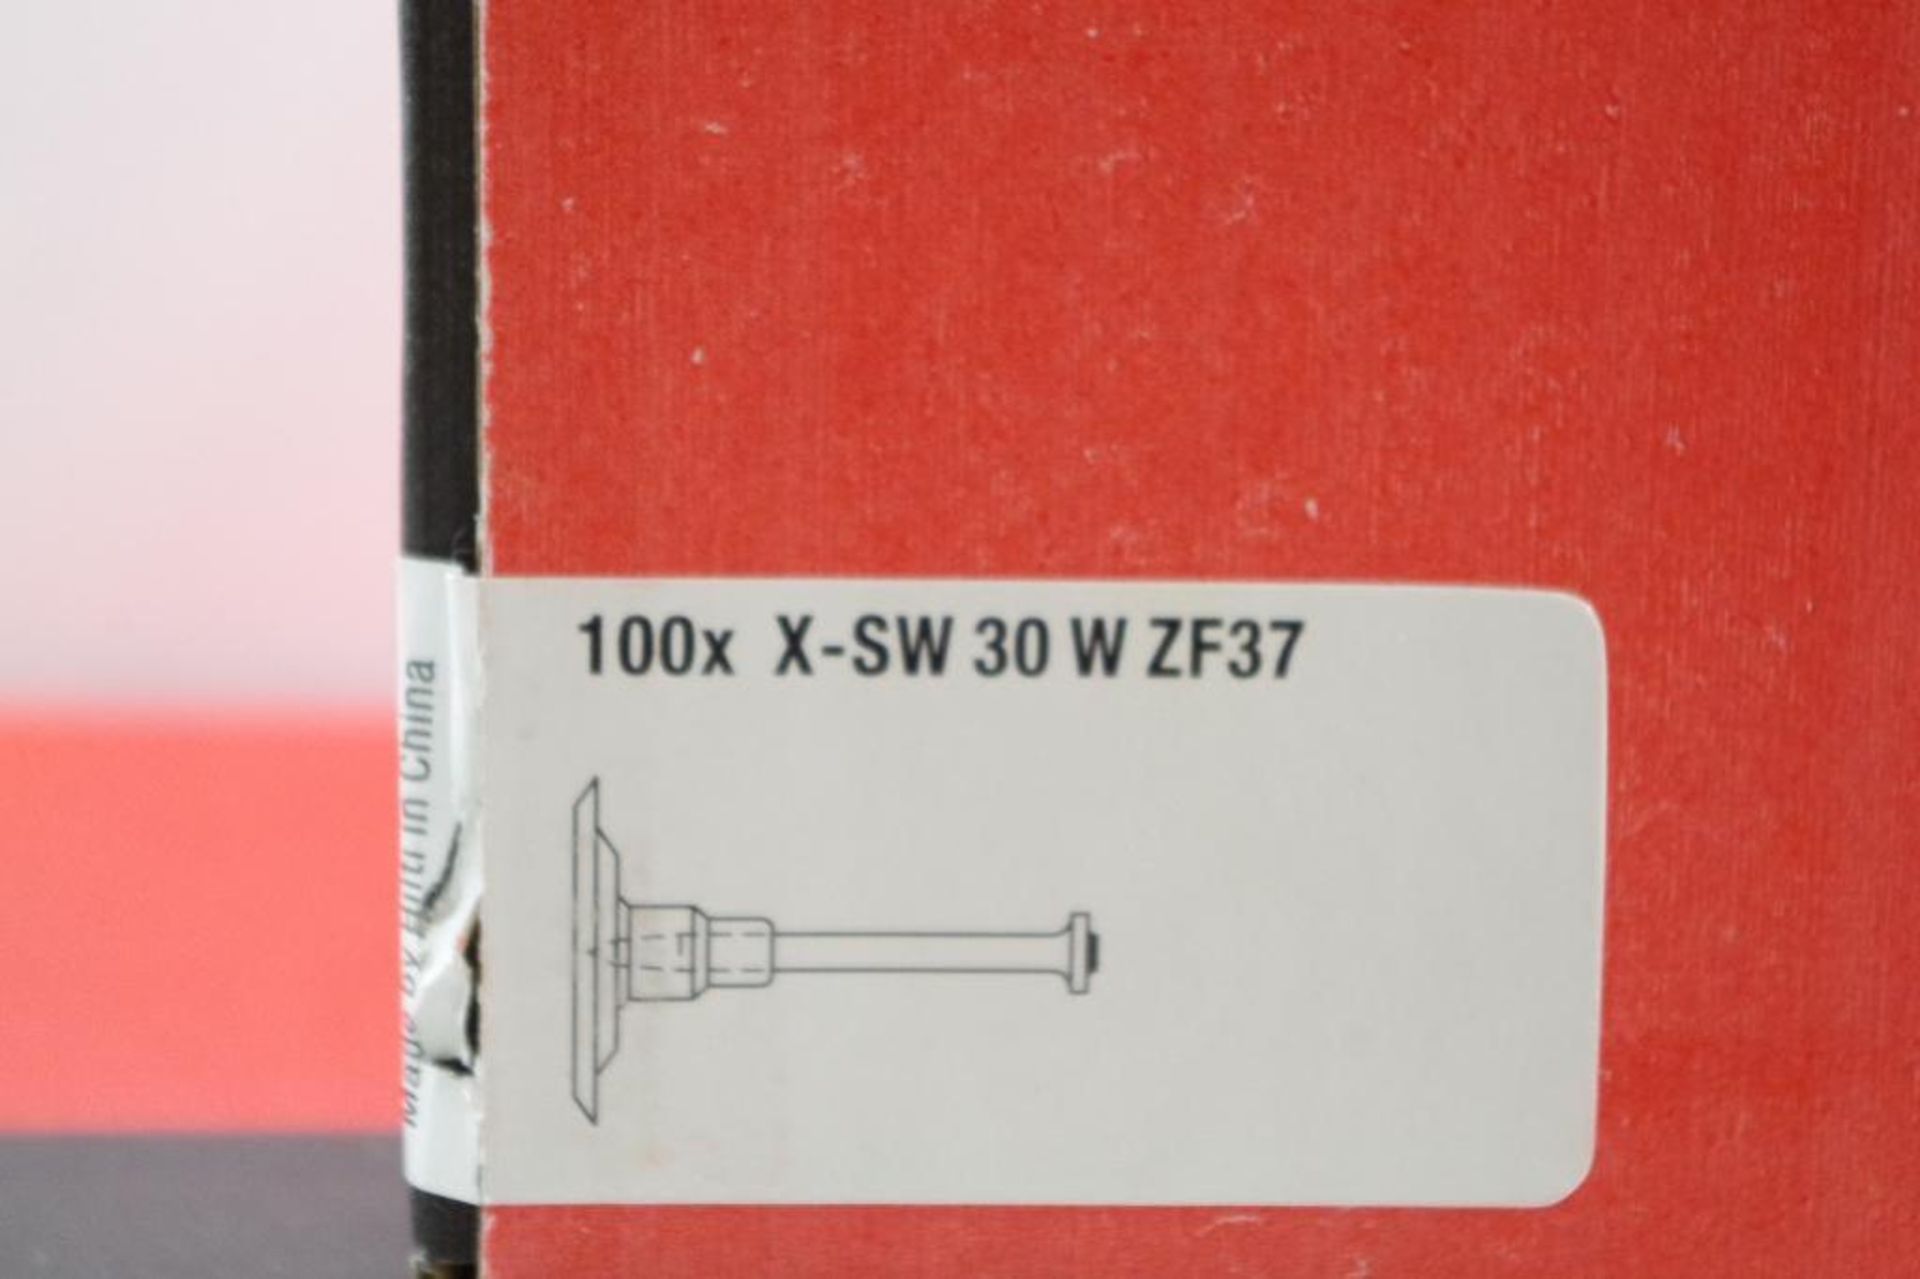 [800] HILTI Soft Washer Fasteners X-SW 30 ZF37, M/N 387675 (8 Boxes of 100) - Image 2 of 4